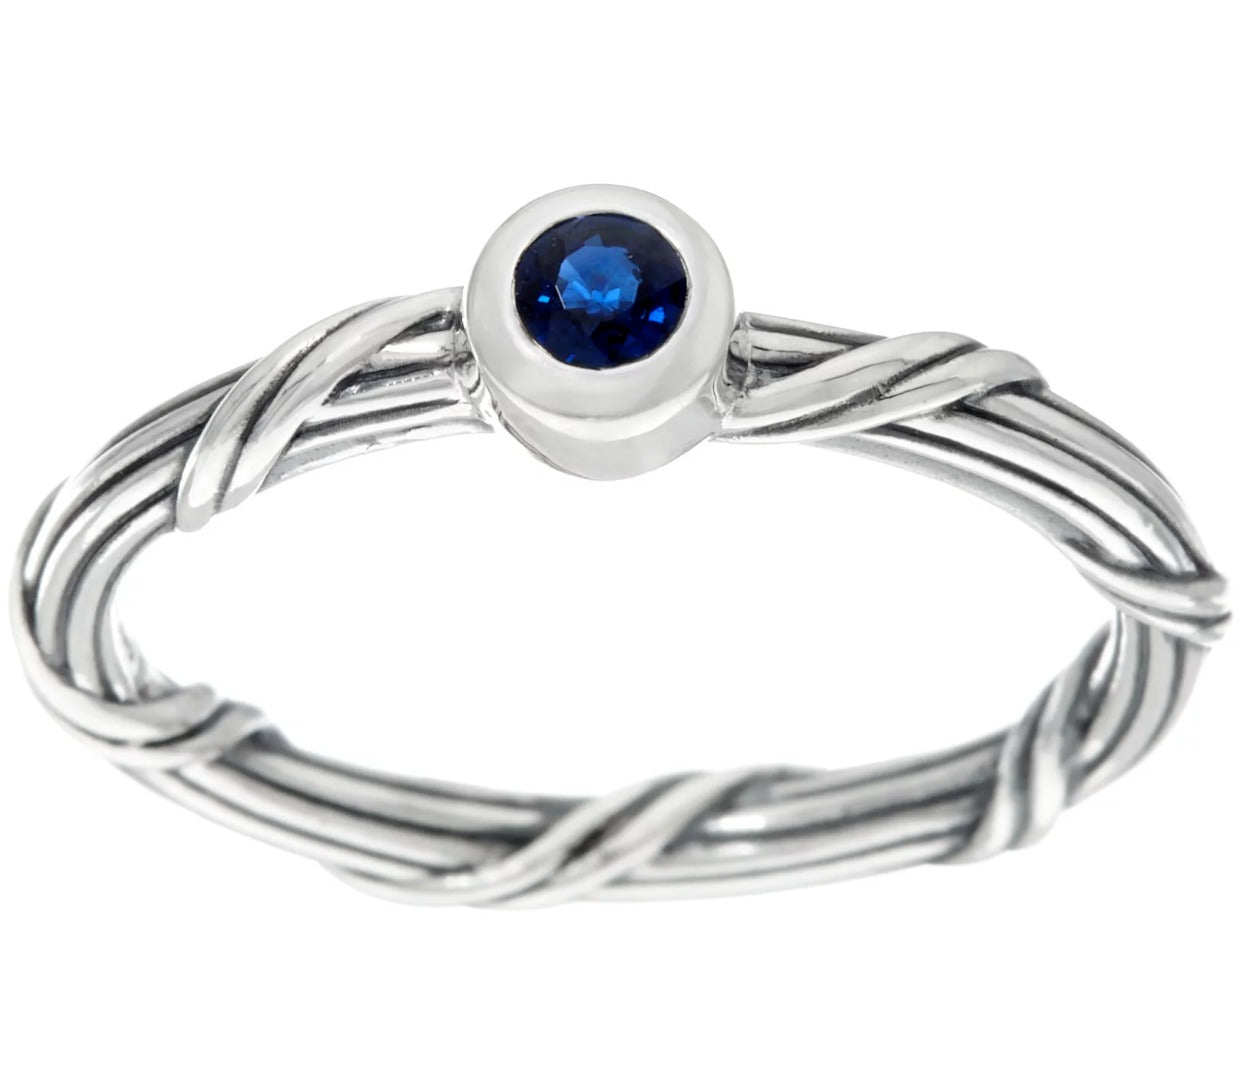 Peter Thomas Roth Sterling Silver Signature Romance Sapphire Ring, Size 5